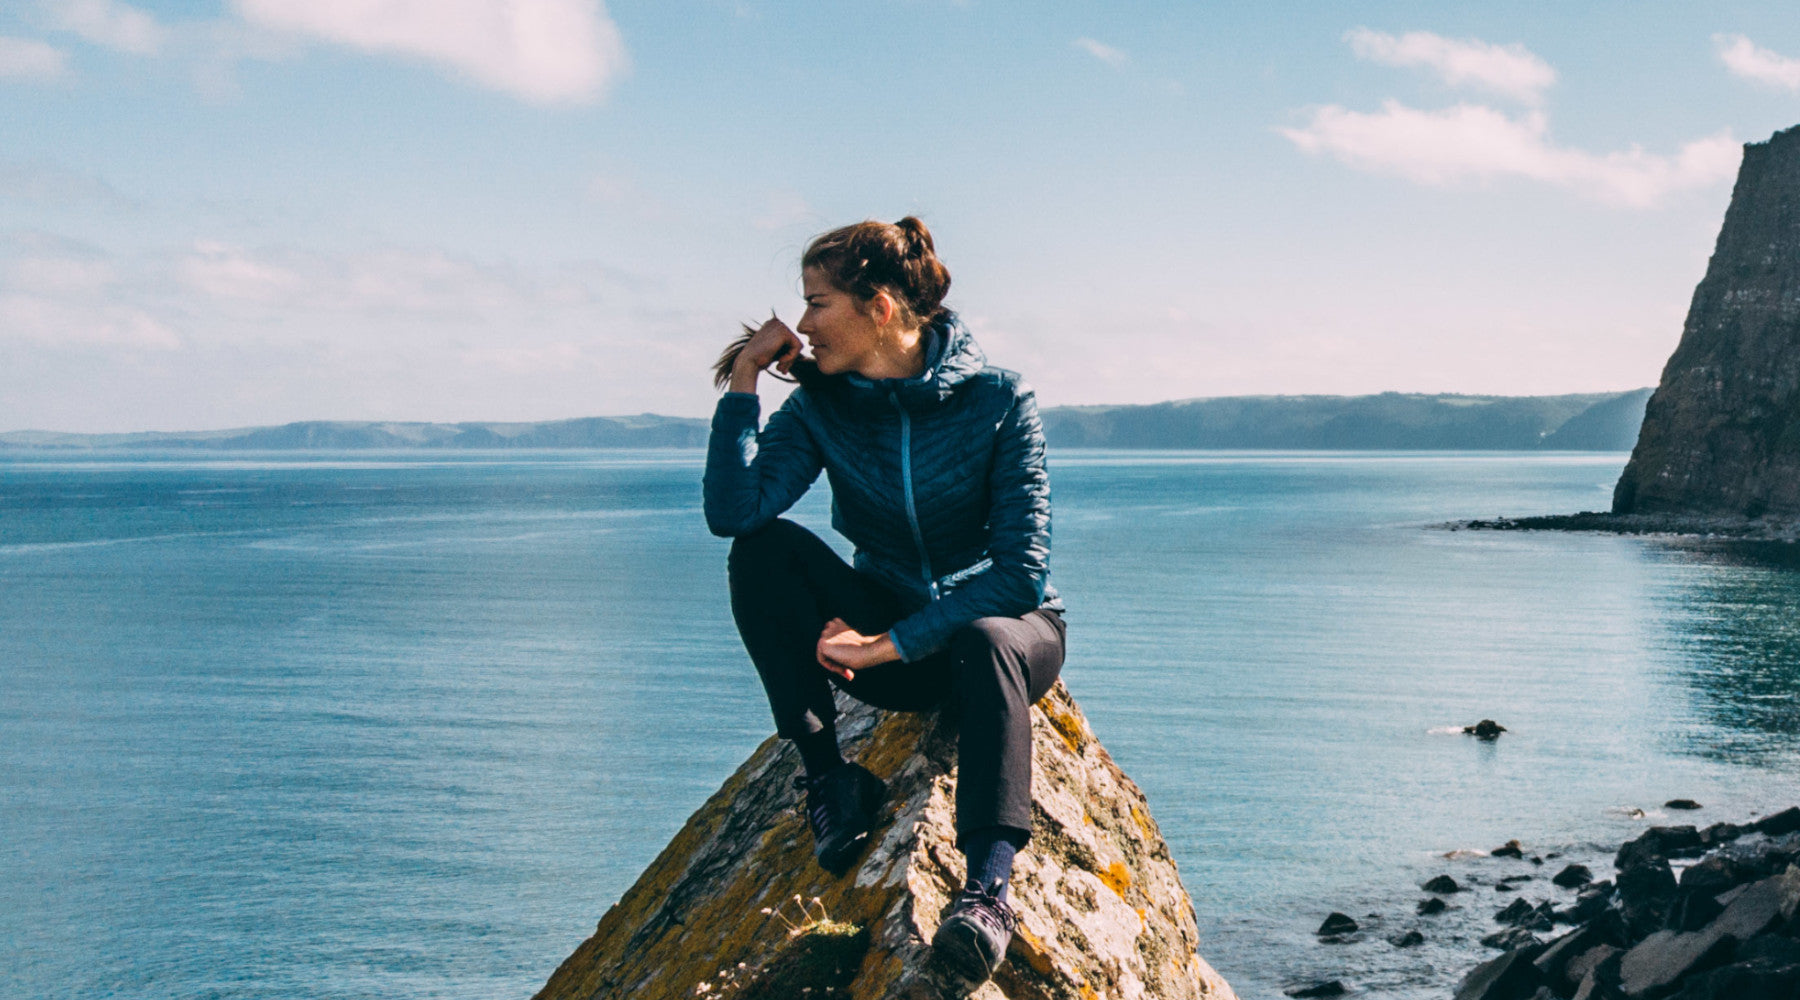 Isobaa Merino Wool Insulated Jacket sat on a rocky cliffside next to the calm ocean